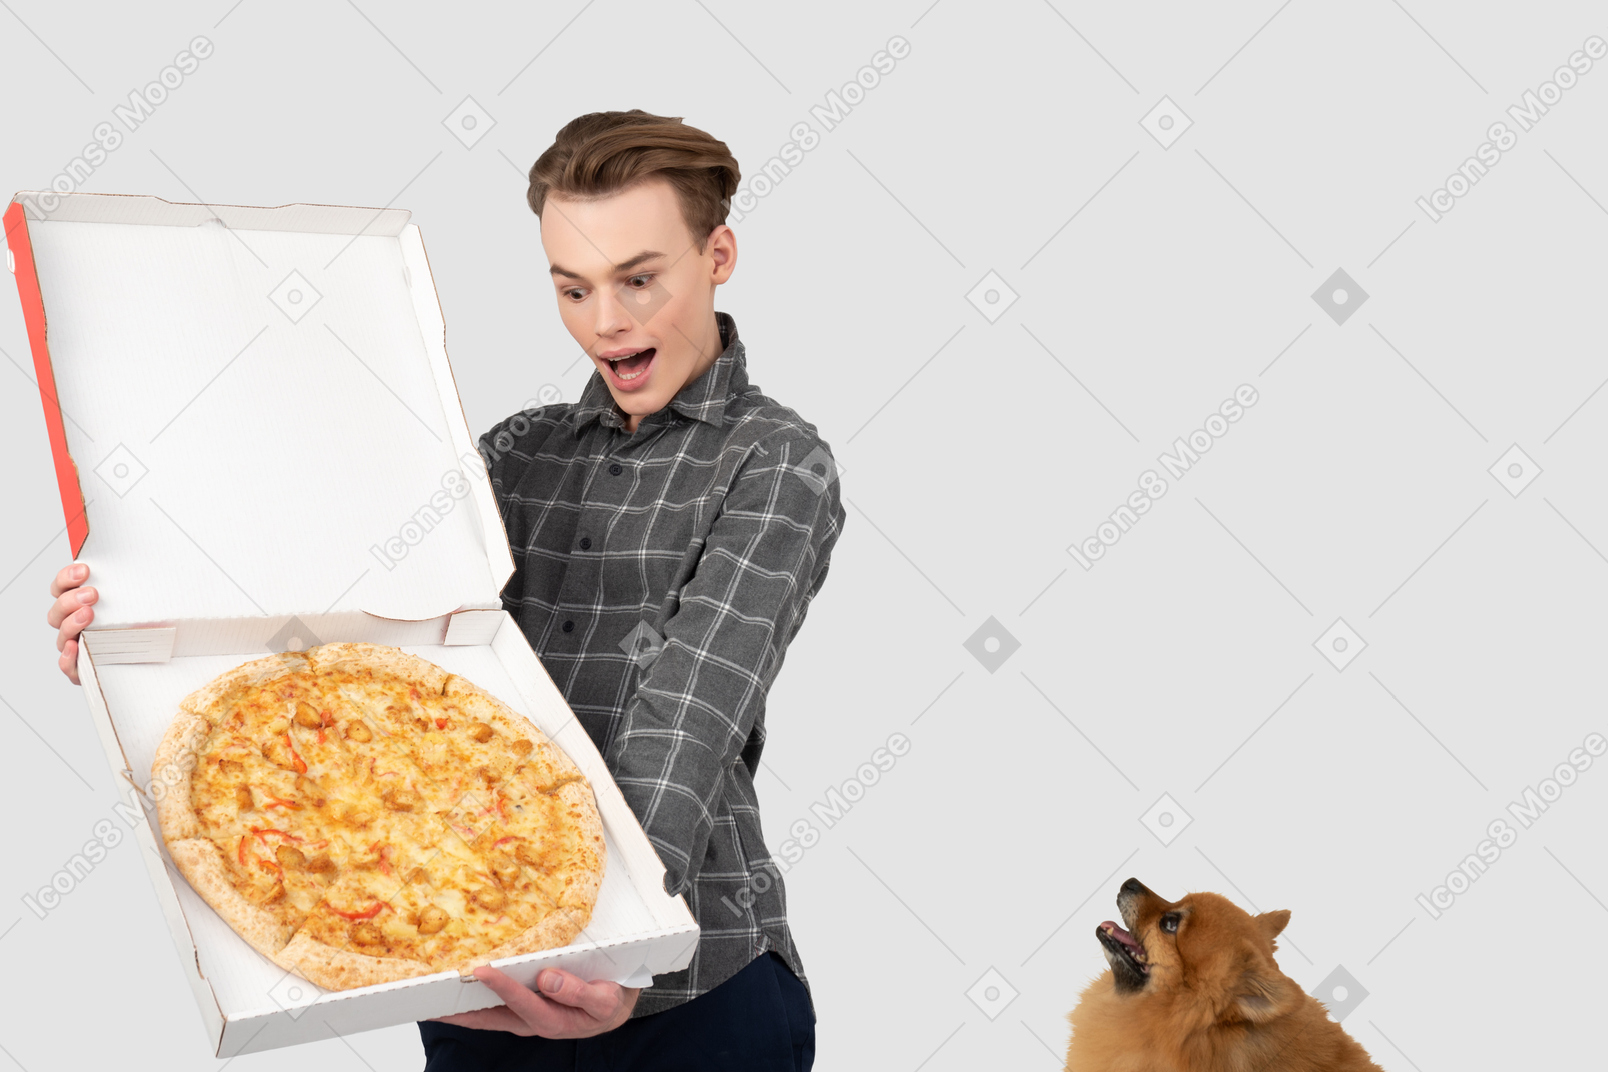 A man holding a pizza box with a dog in the background